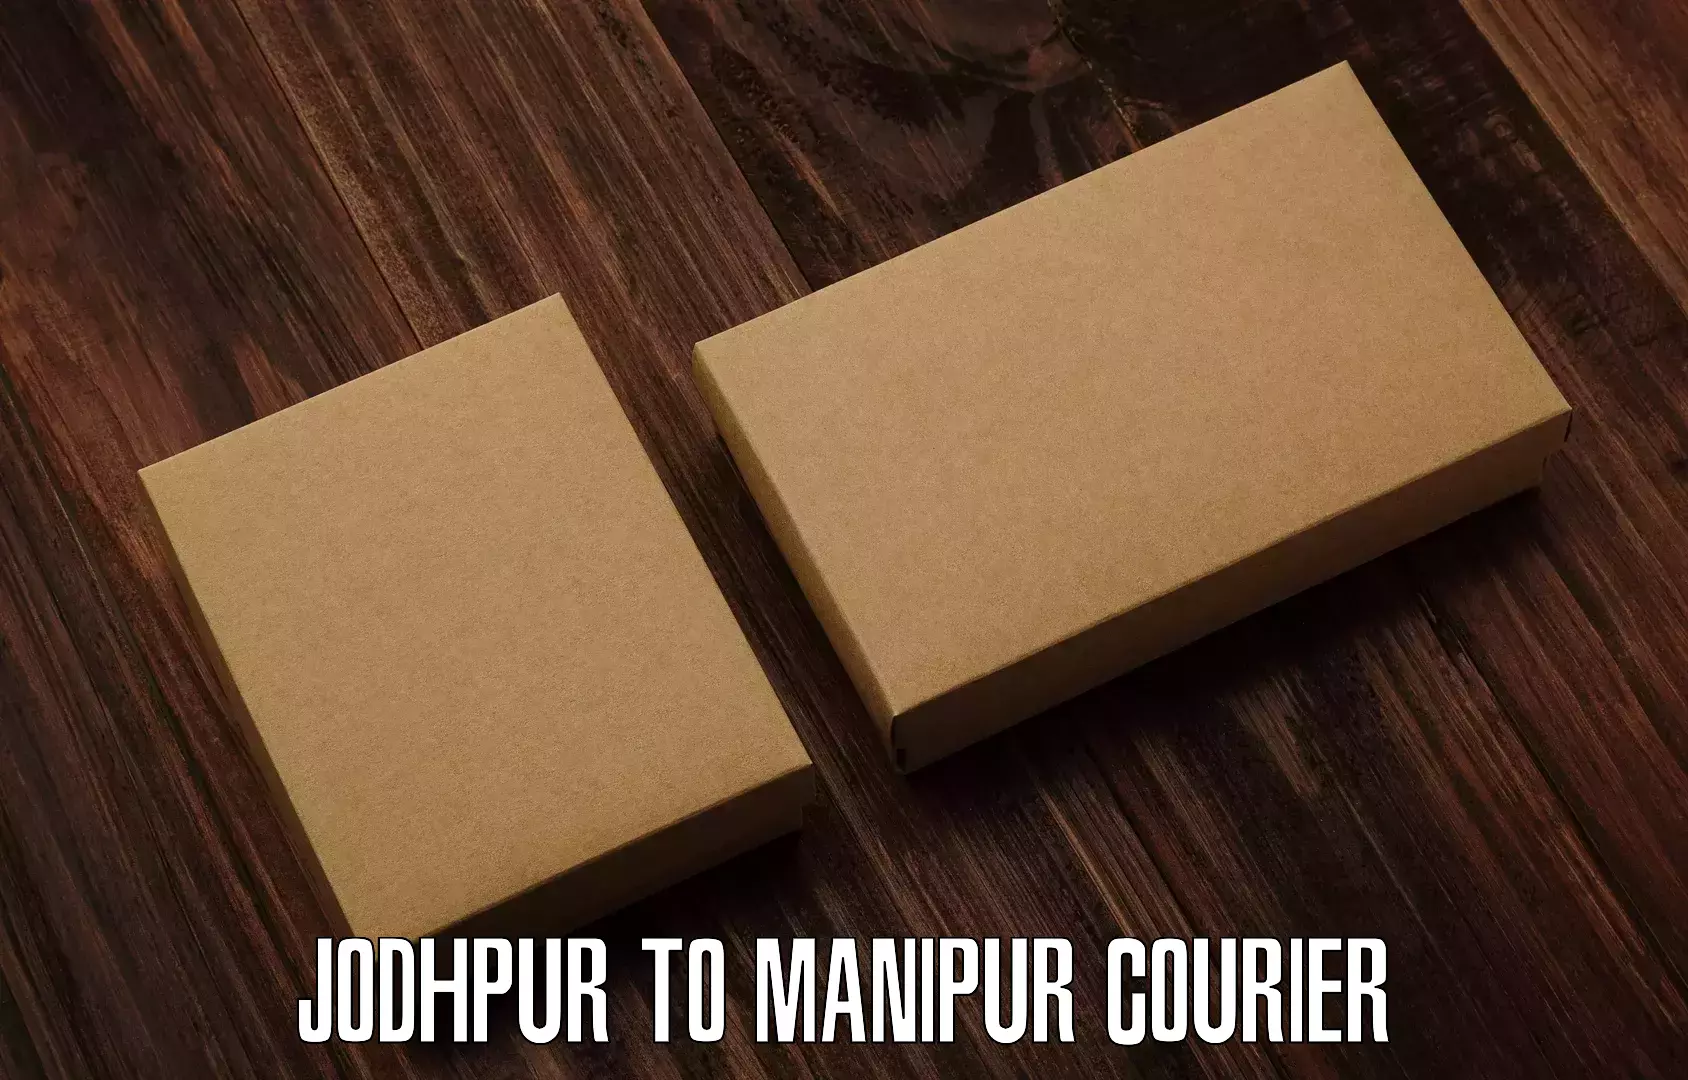 User-friendly delivery service Jodhpur to Imphal